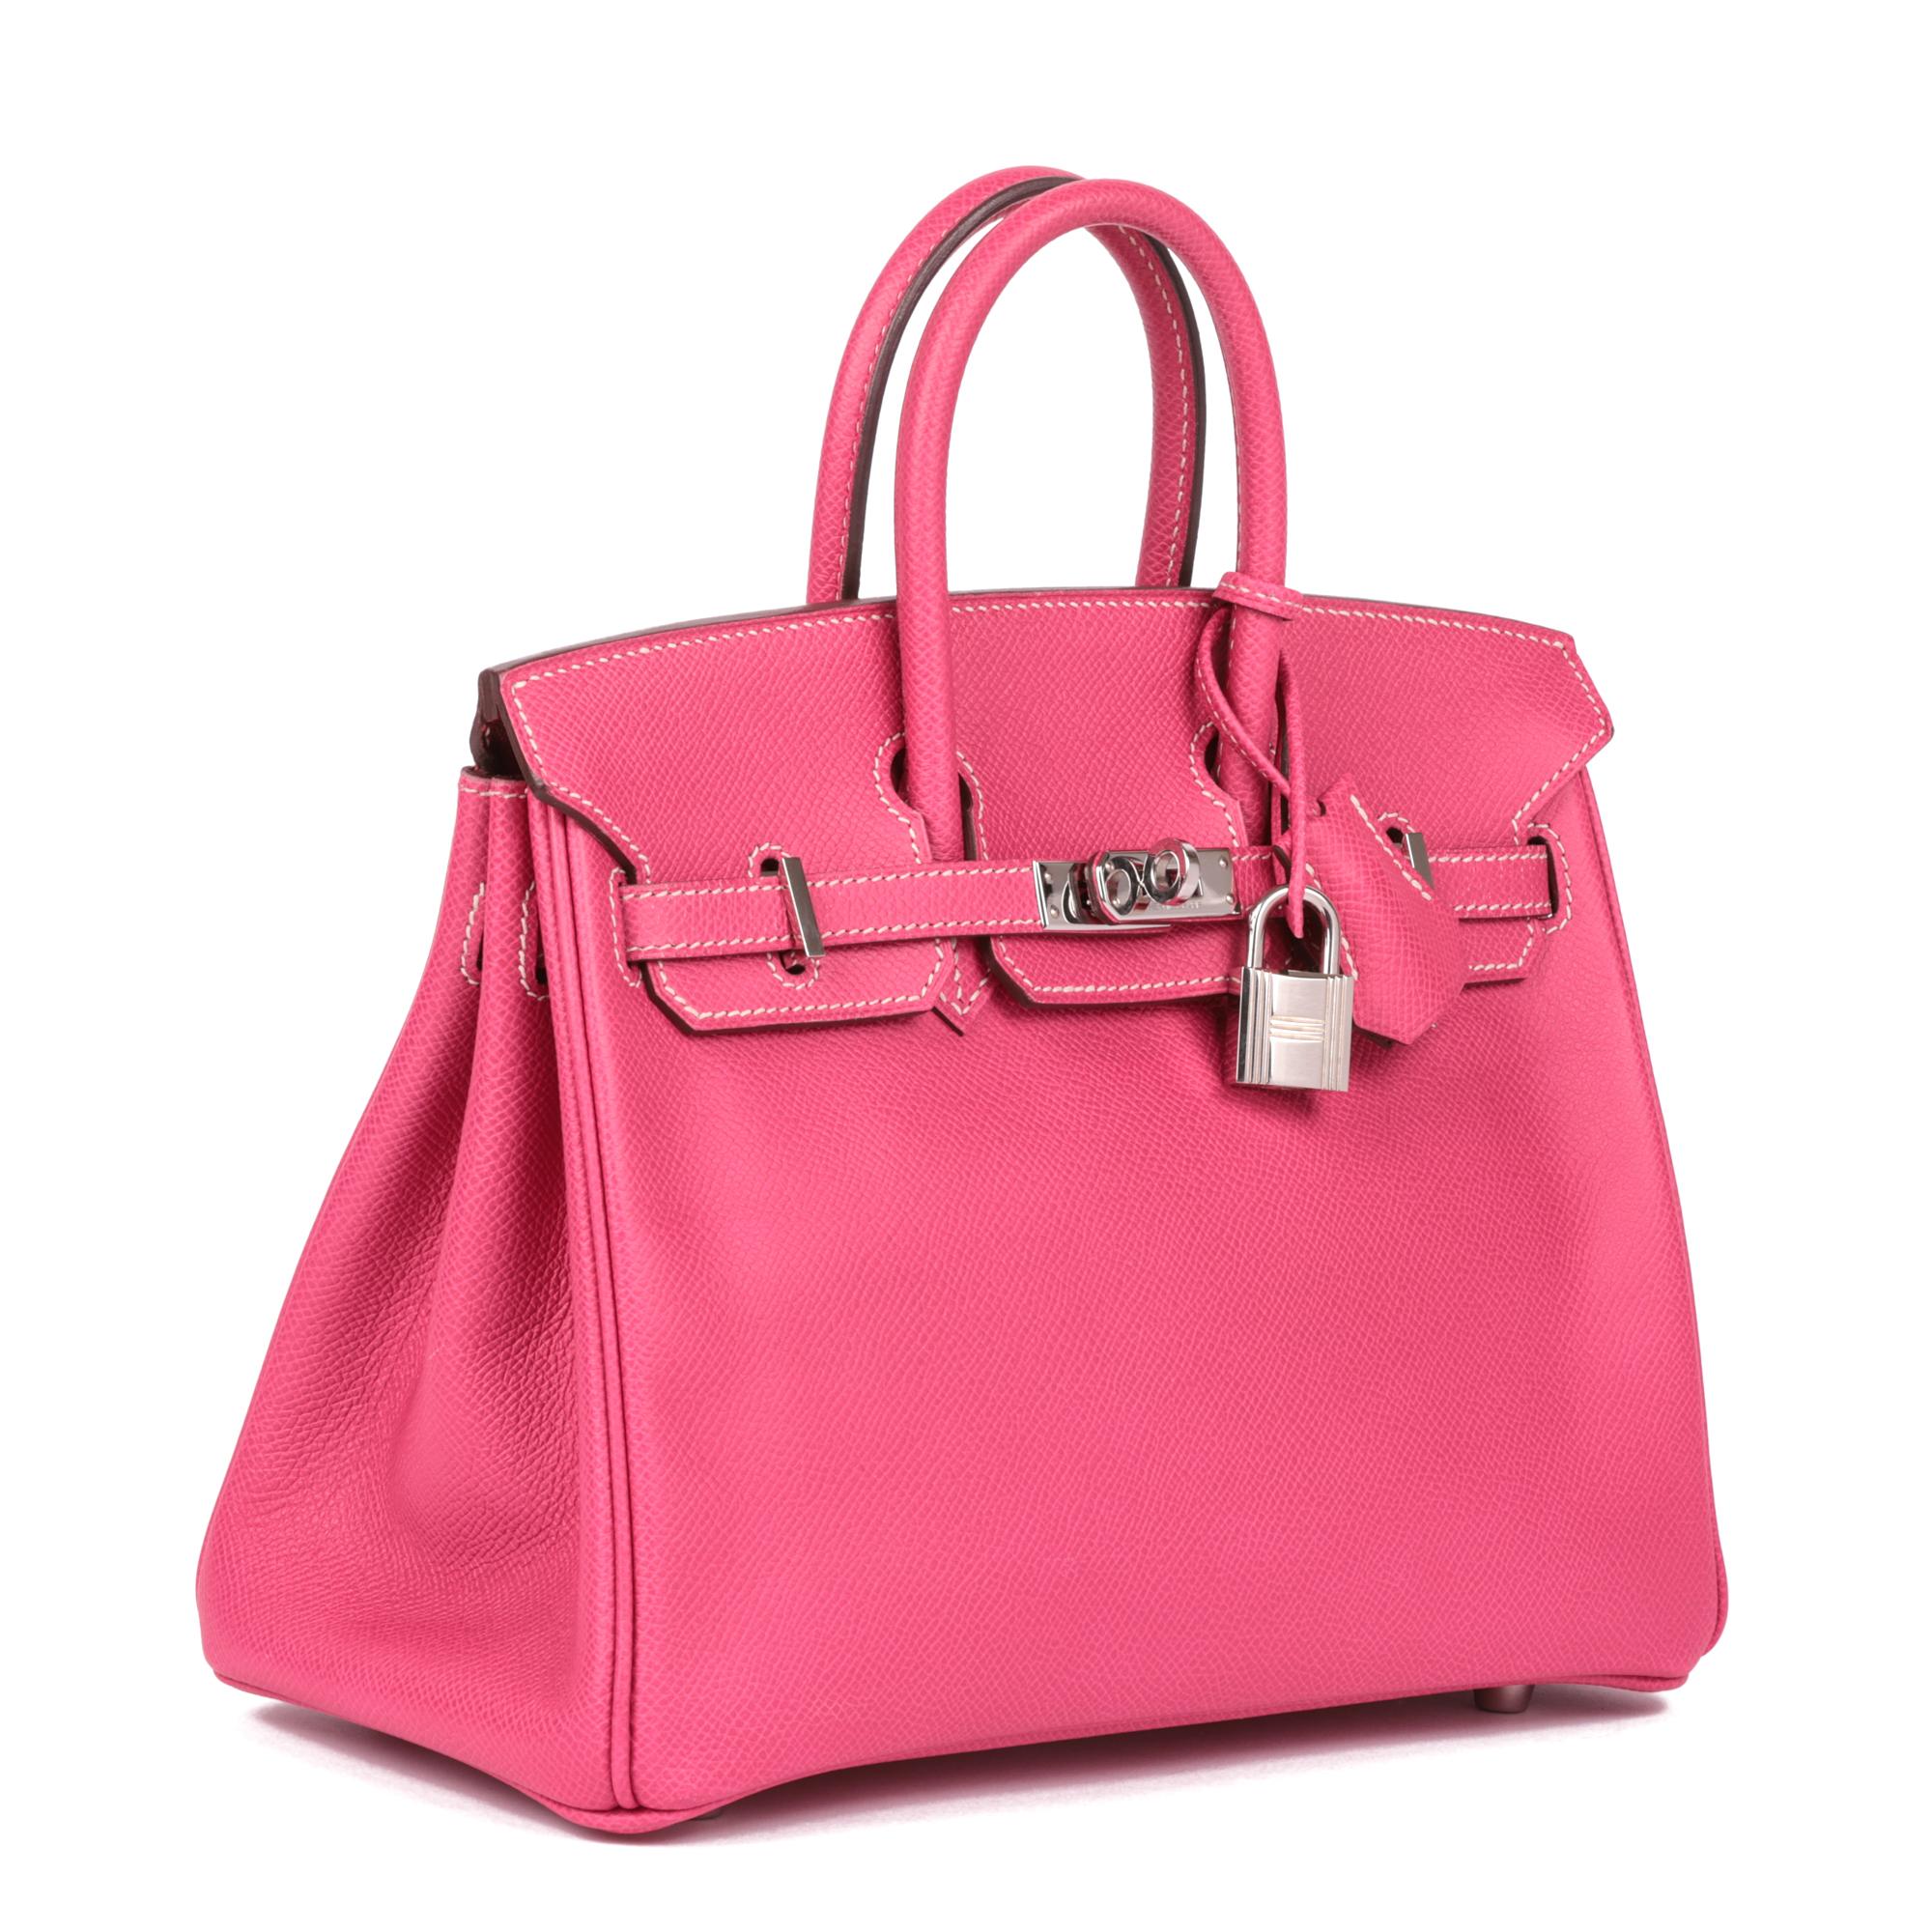 HERMÈS
Rose Tyrien & Rubis Epsom Leather Candy Collection Birkin 25cm Retourne

Serial Number: [O]
Age (Circa): 2011
Accompanied By: Hermès Dust Bag, Lock, Keys, Clochette, Care Booklet
Authenticity Details: Date Stamp (Made in France)
Gender: